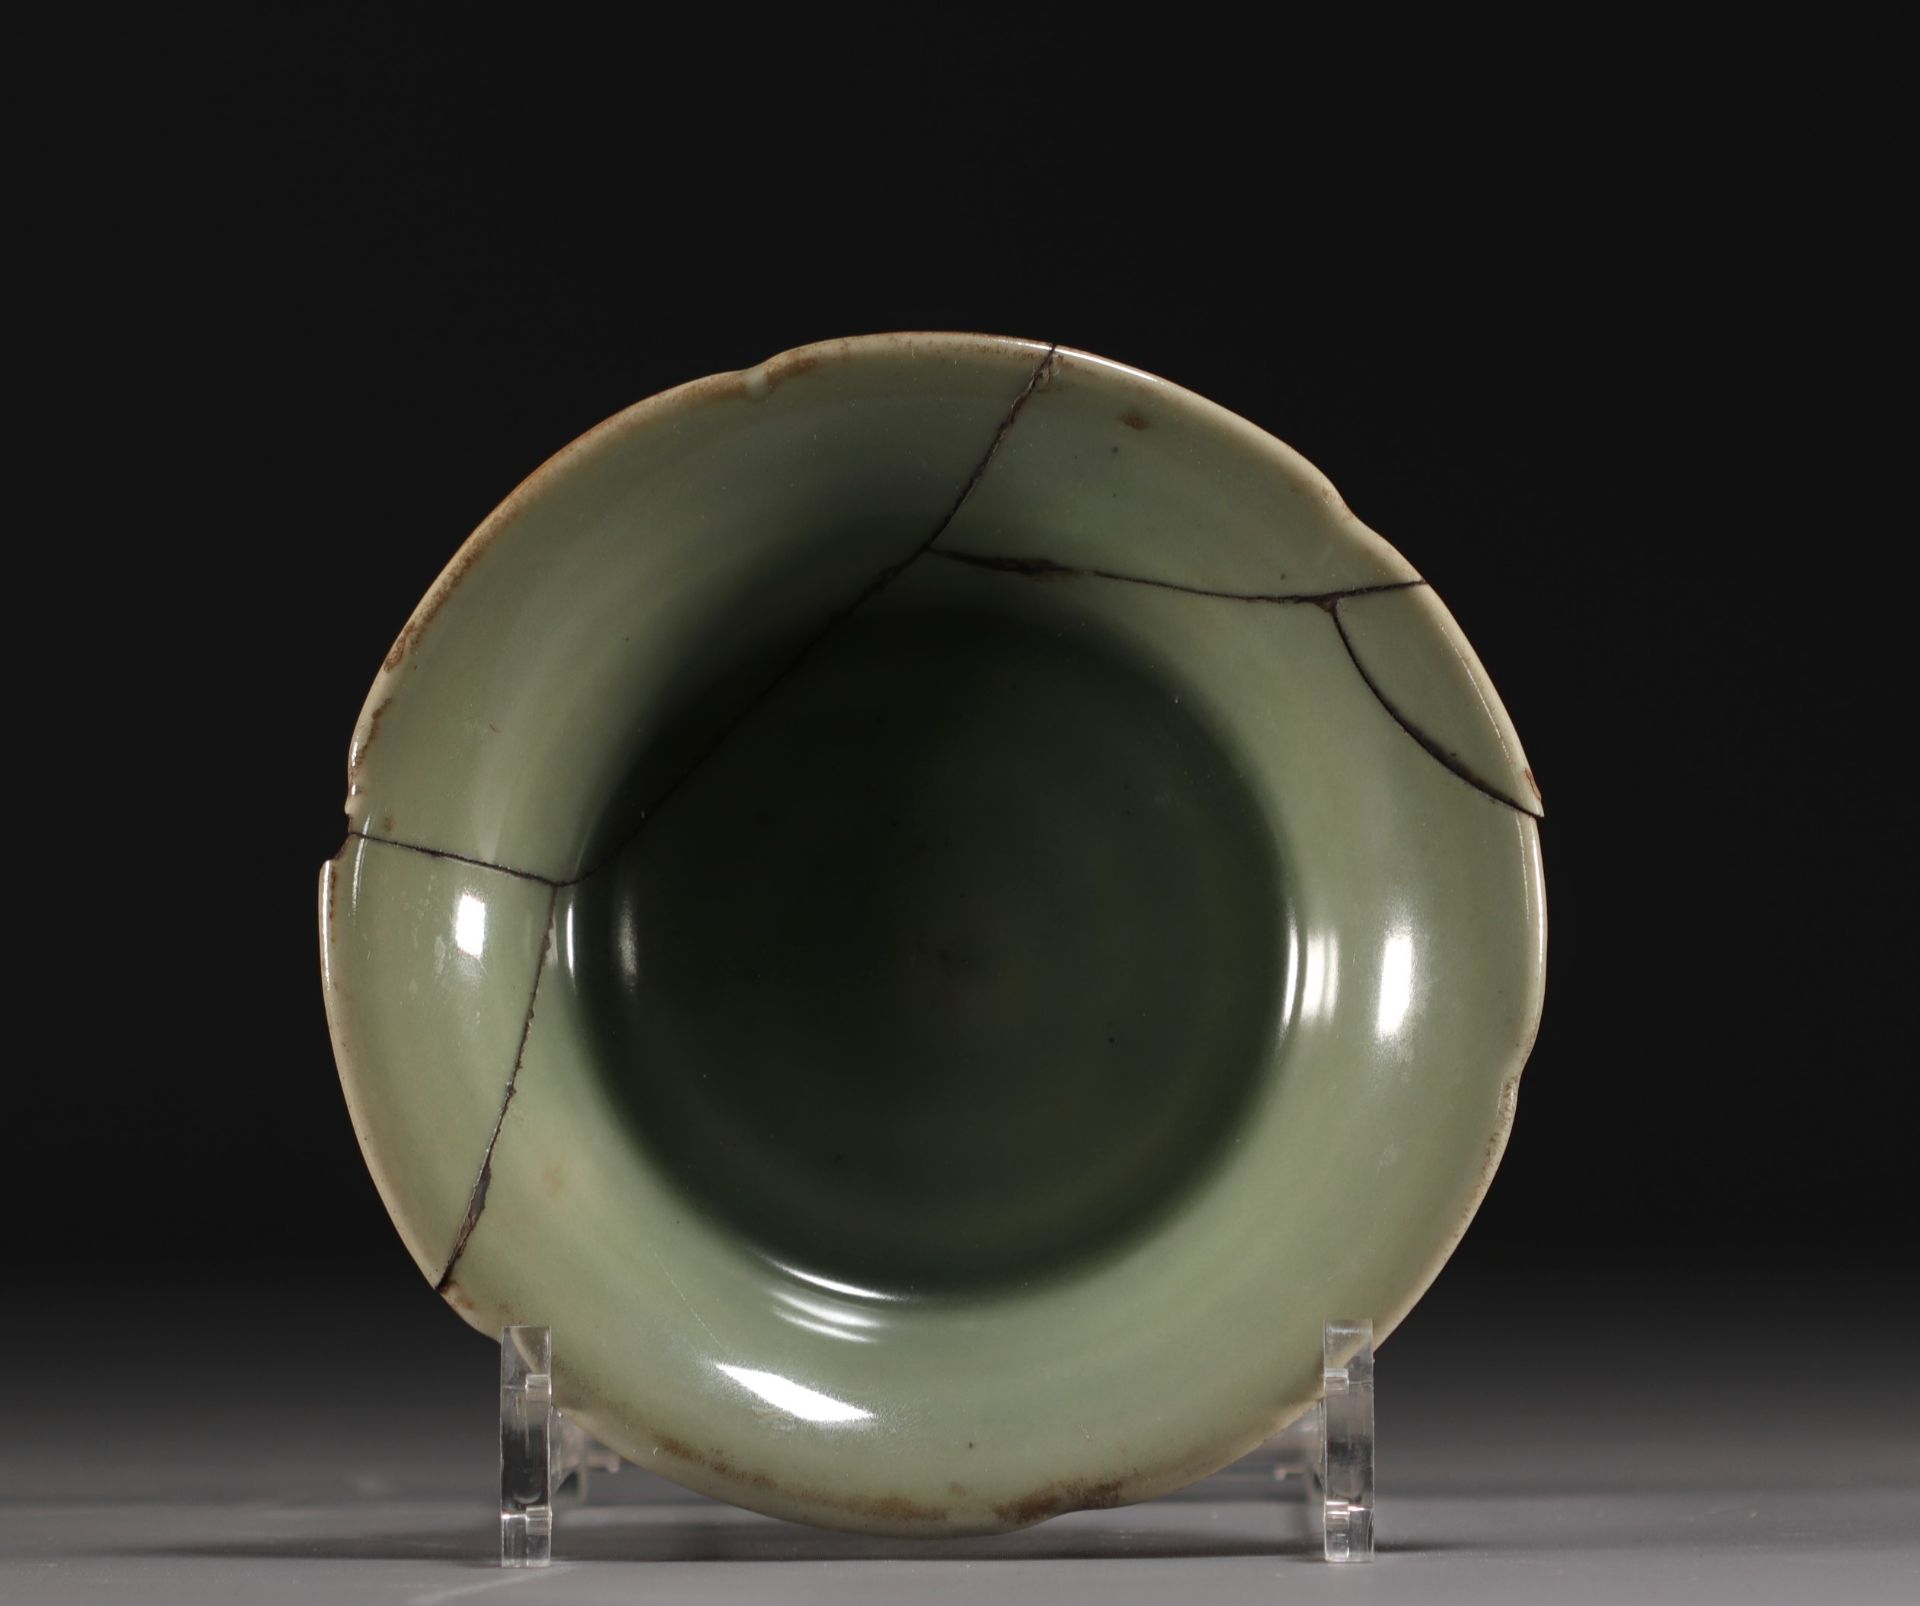 China - Celadon rimmed plate, Song period.